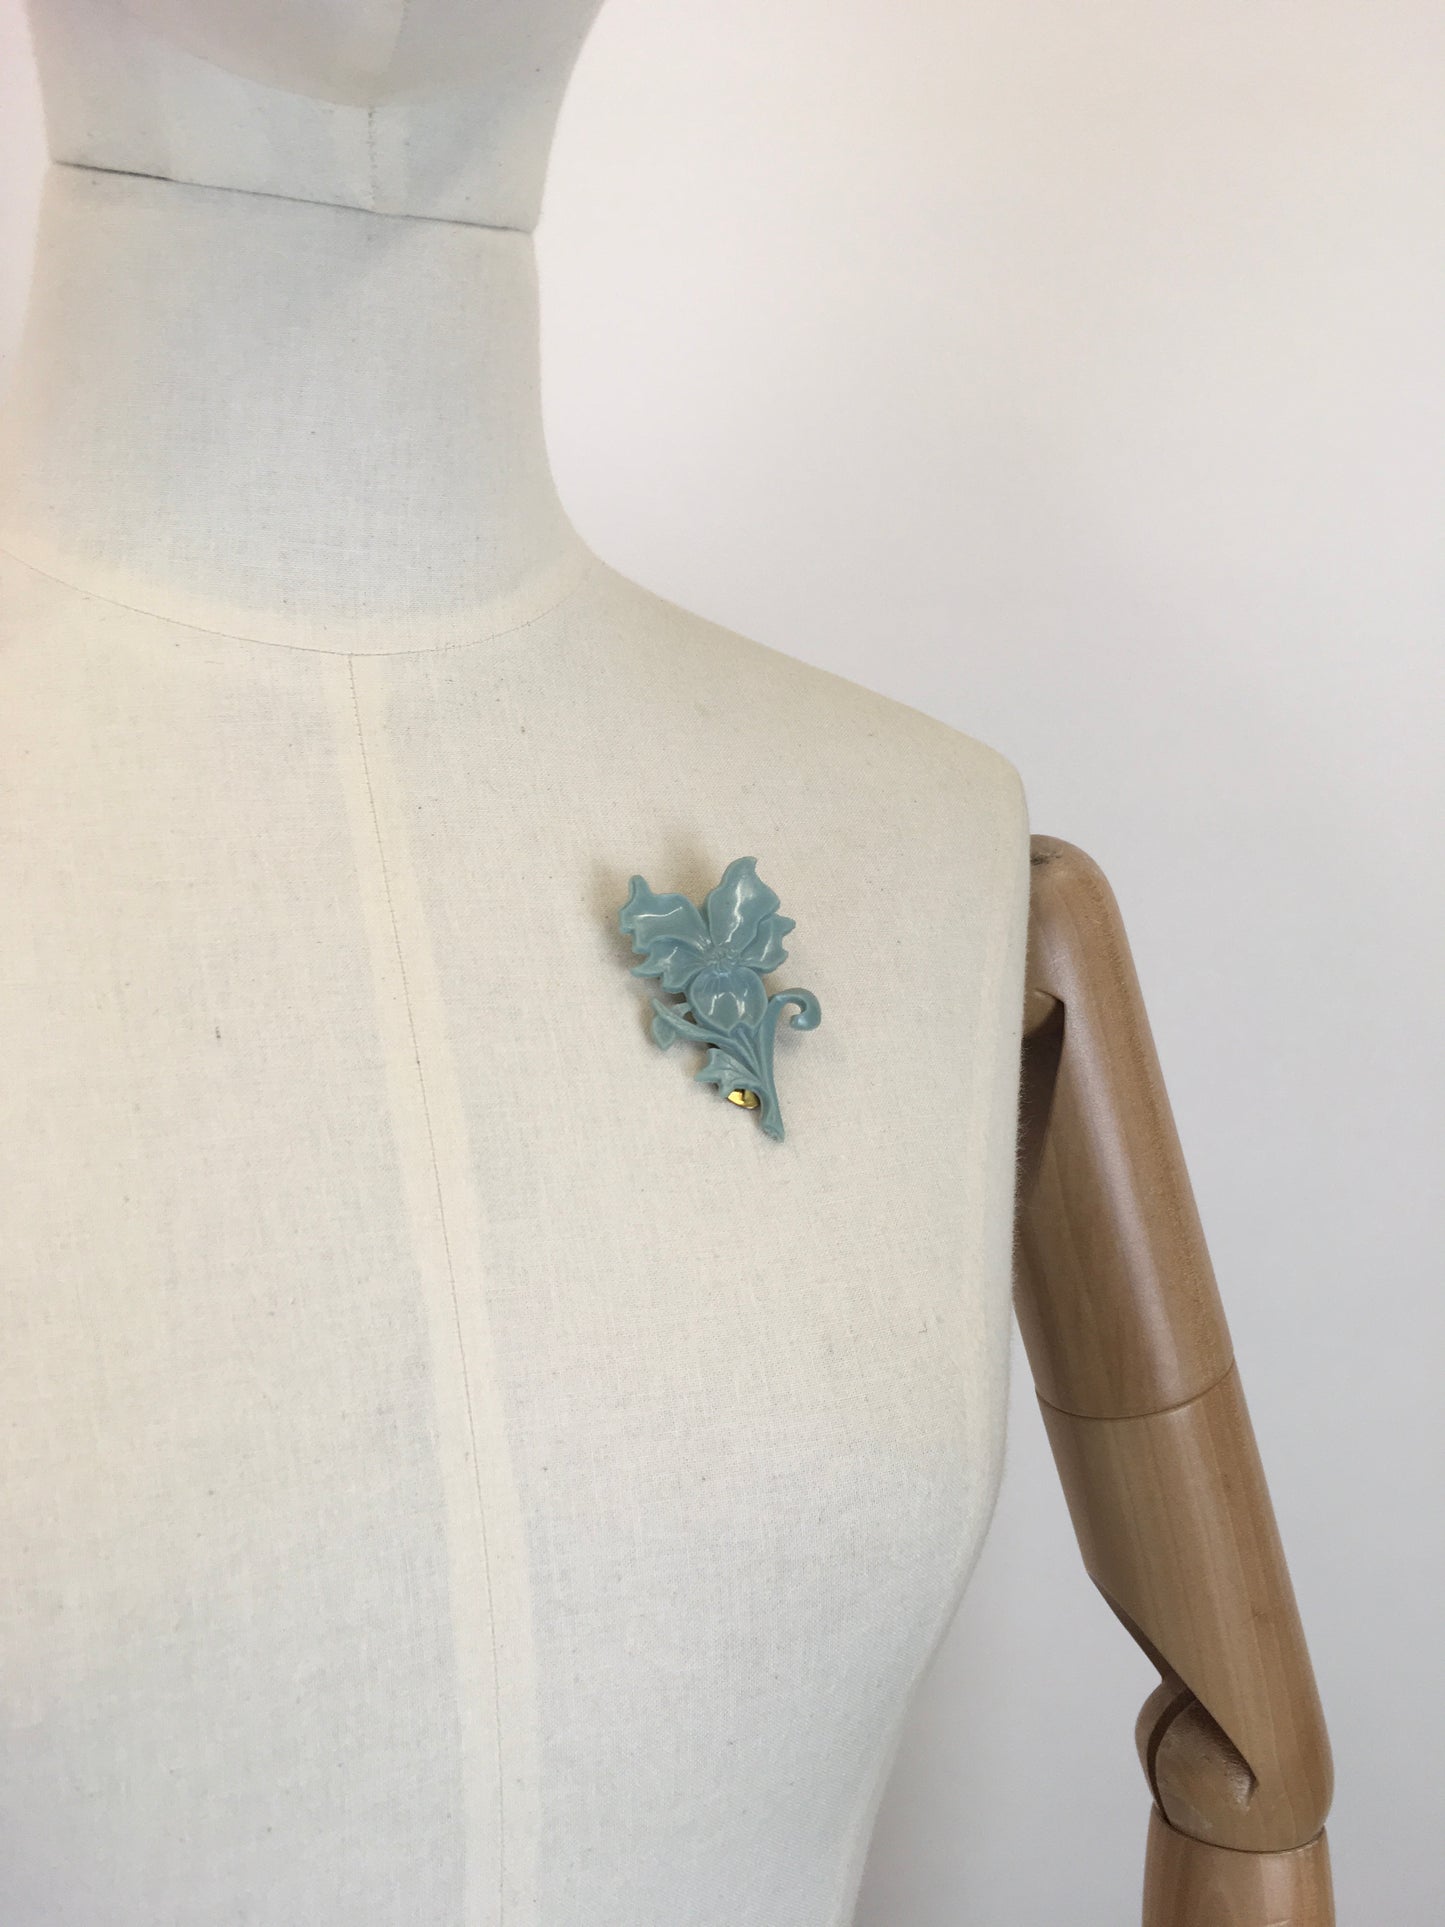 Original Late 1930’s Early 1940’s Plastic Floral Dress Clip - In Pale Duck Egg